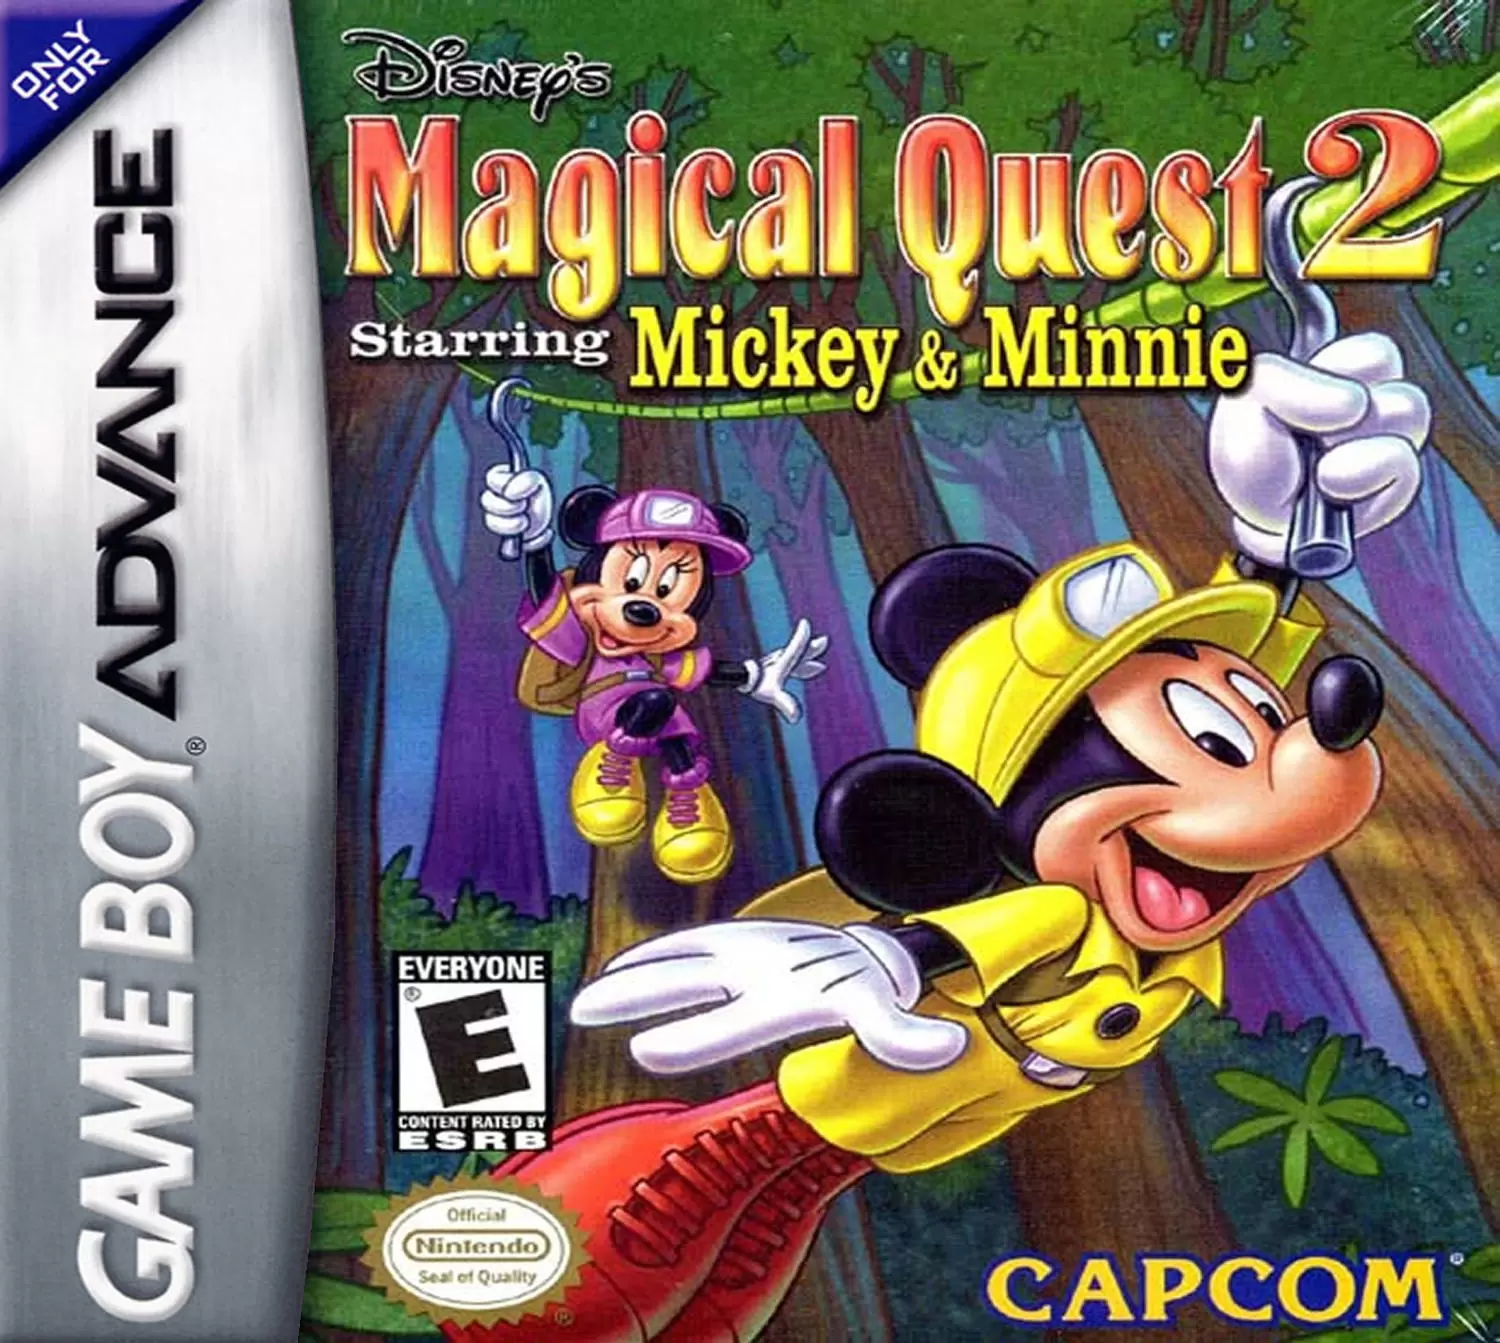 Jeux Game Boy Advance - Disney\'s Magical Quest 2 Starring Mickey & Minnie